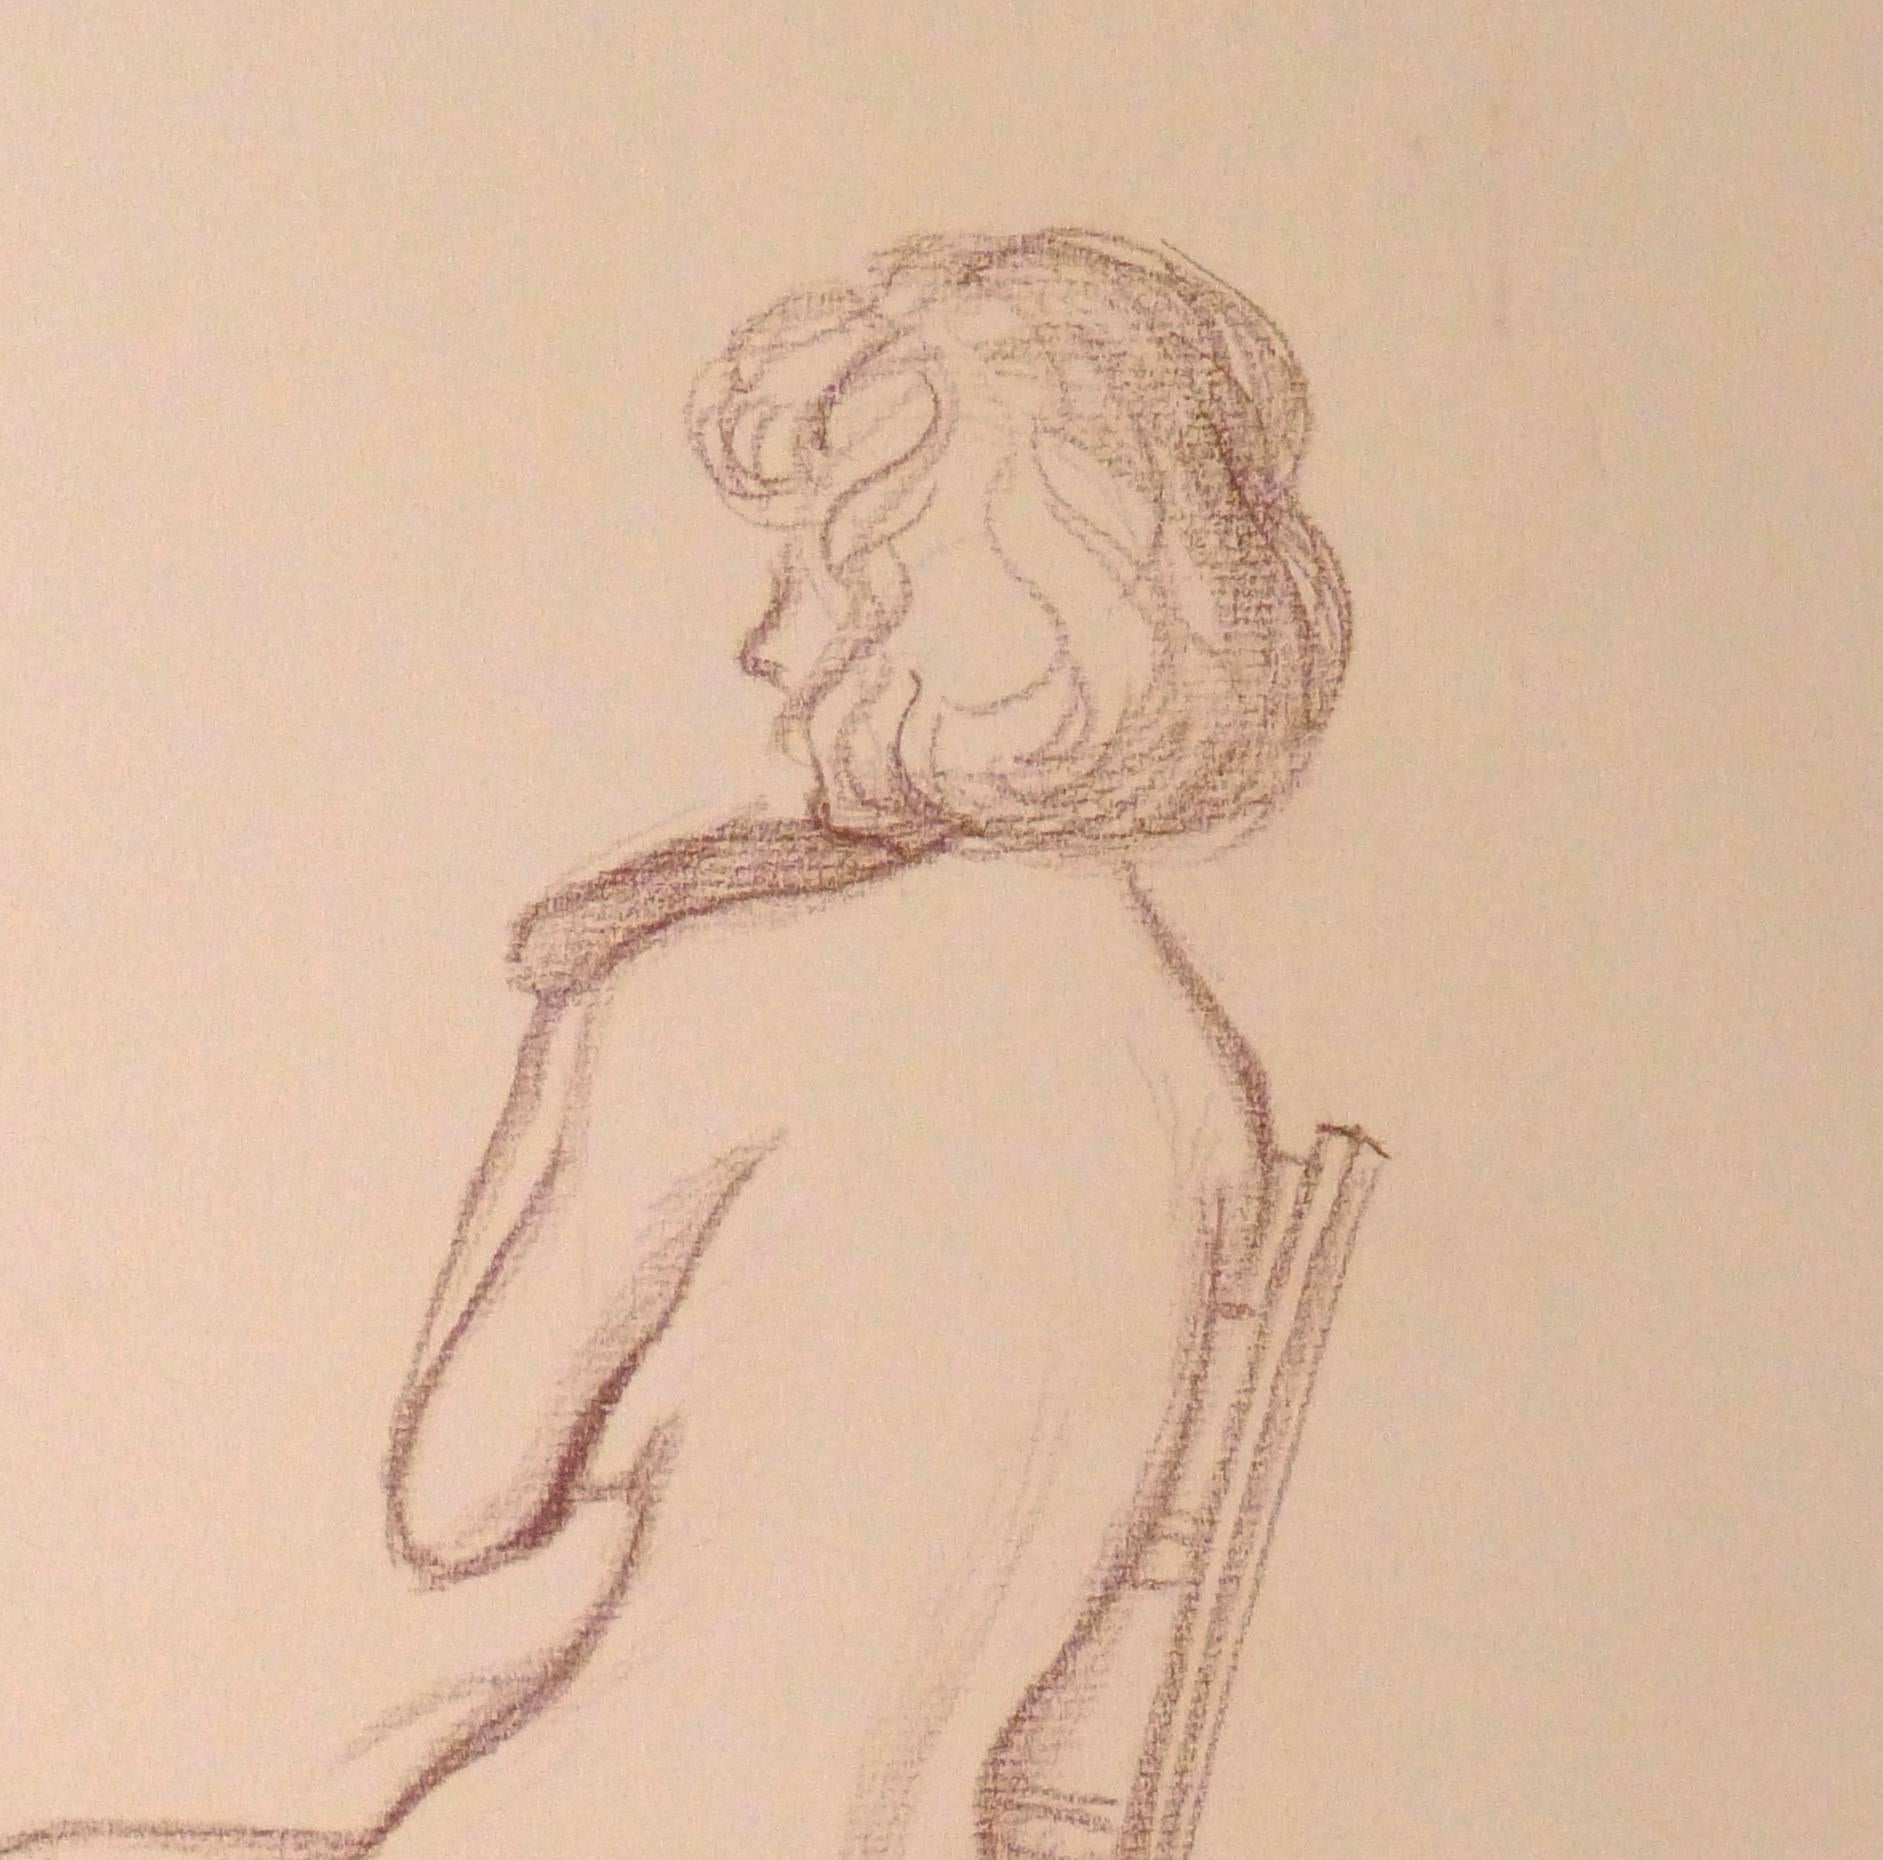 Nude French charcoal sketch of a bashful looking female figure posed with her back to the artist by Maurice Porte, 1996. Dated lower right.

Original artwork on paper displayed on a white mat with a gold border. Archival plastic sleeve and